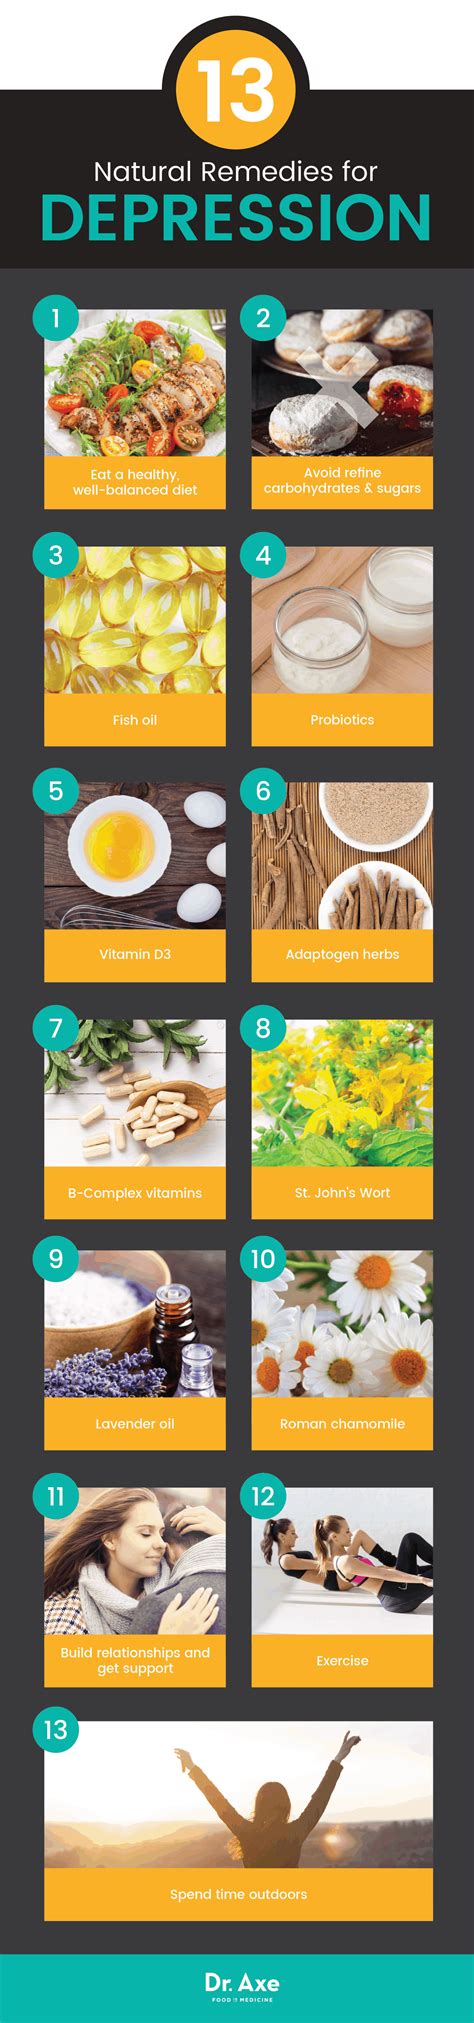 natural remedies for depression 13 ways to recover dr axe